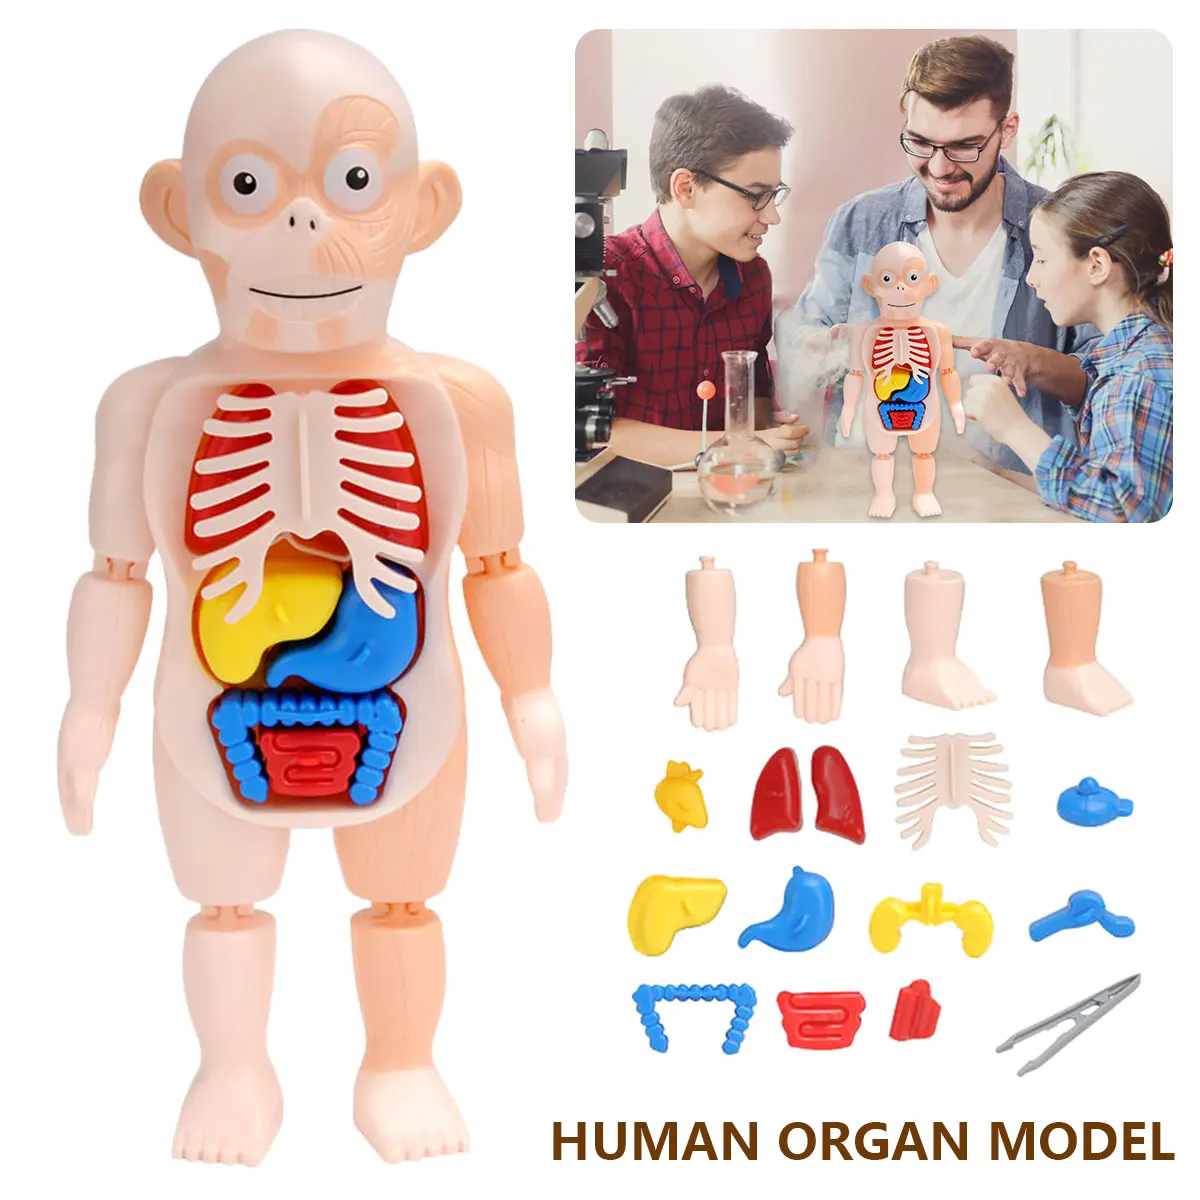 

17 Pcs Kid Montessori Toy Puzzle Human Body Anatomy Model Removable Assembled Toy Body Organ Teaching Tool Gift for Kids Ages 3+